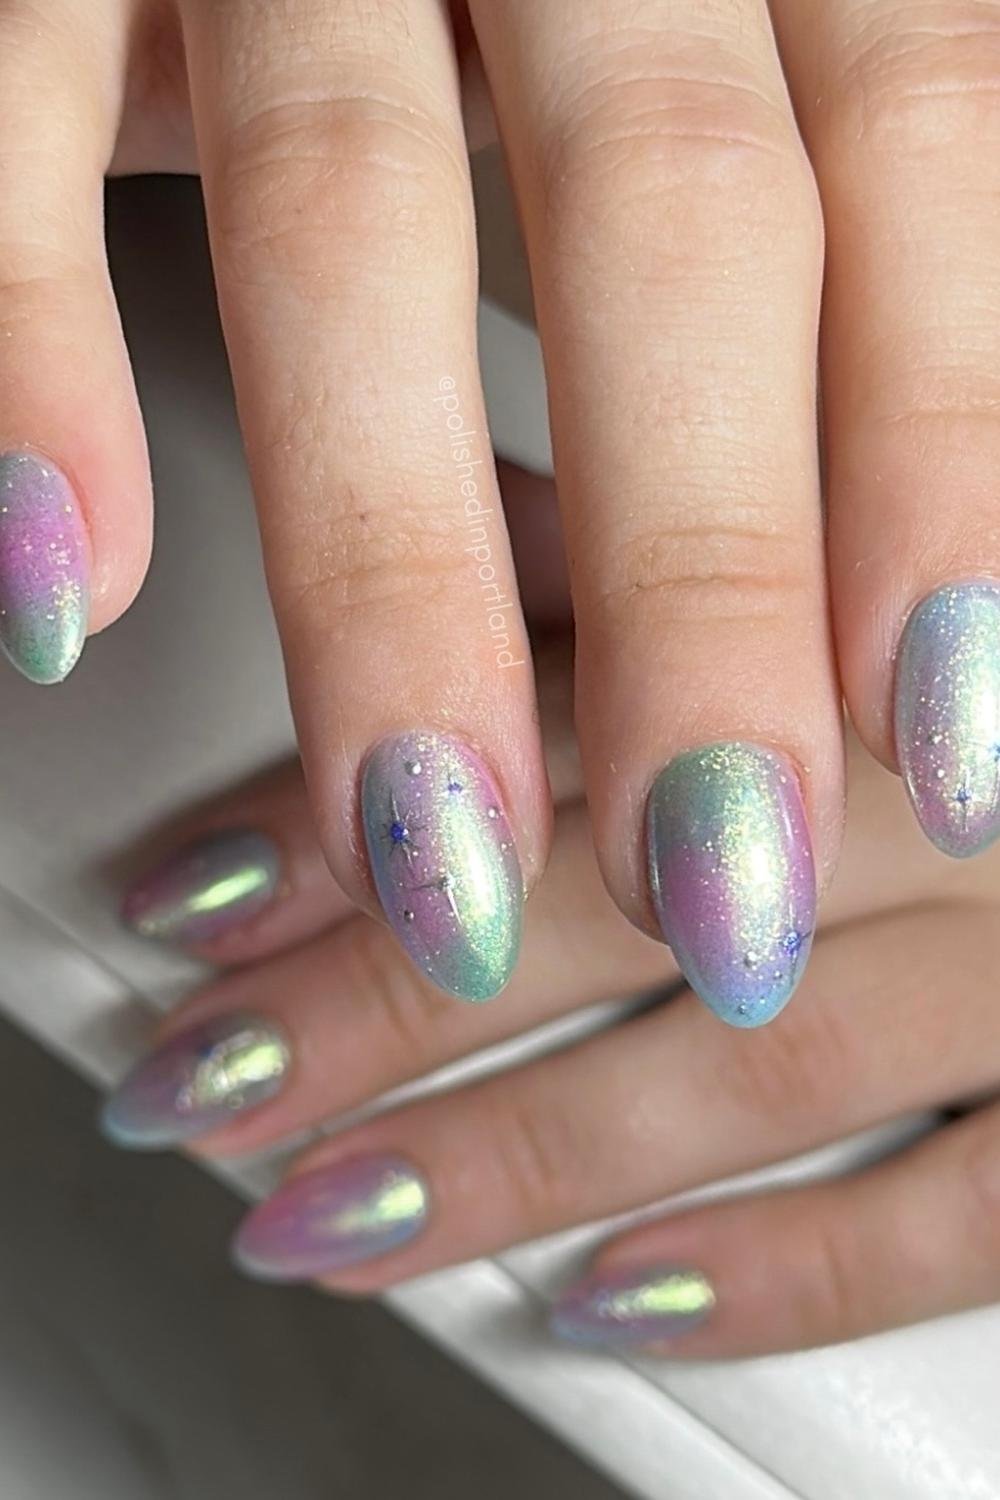 4 - Picture of Mermaid Nails